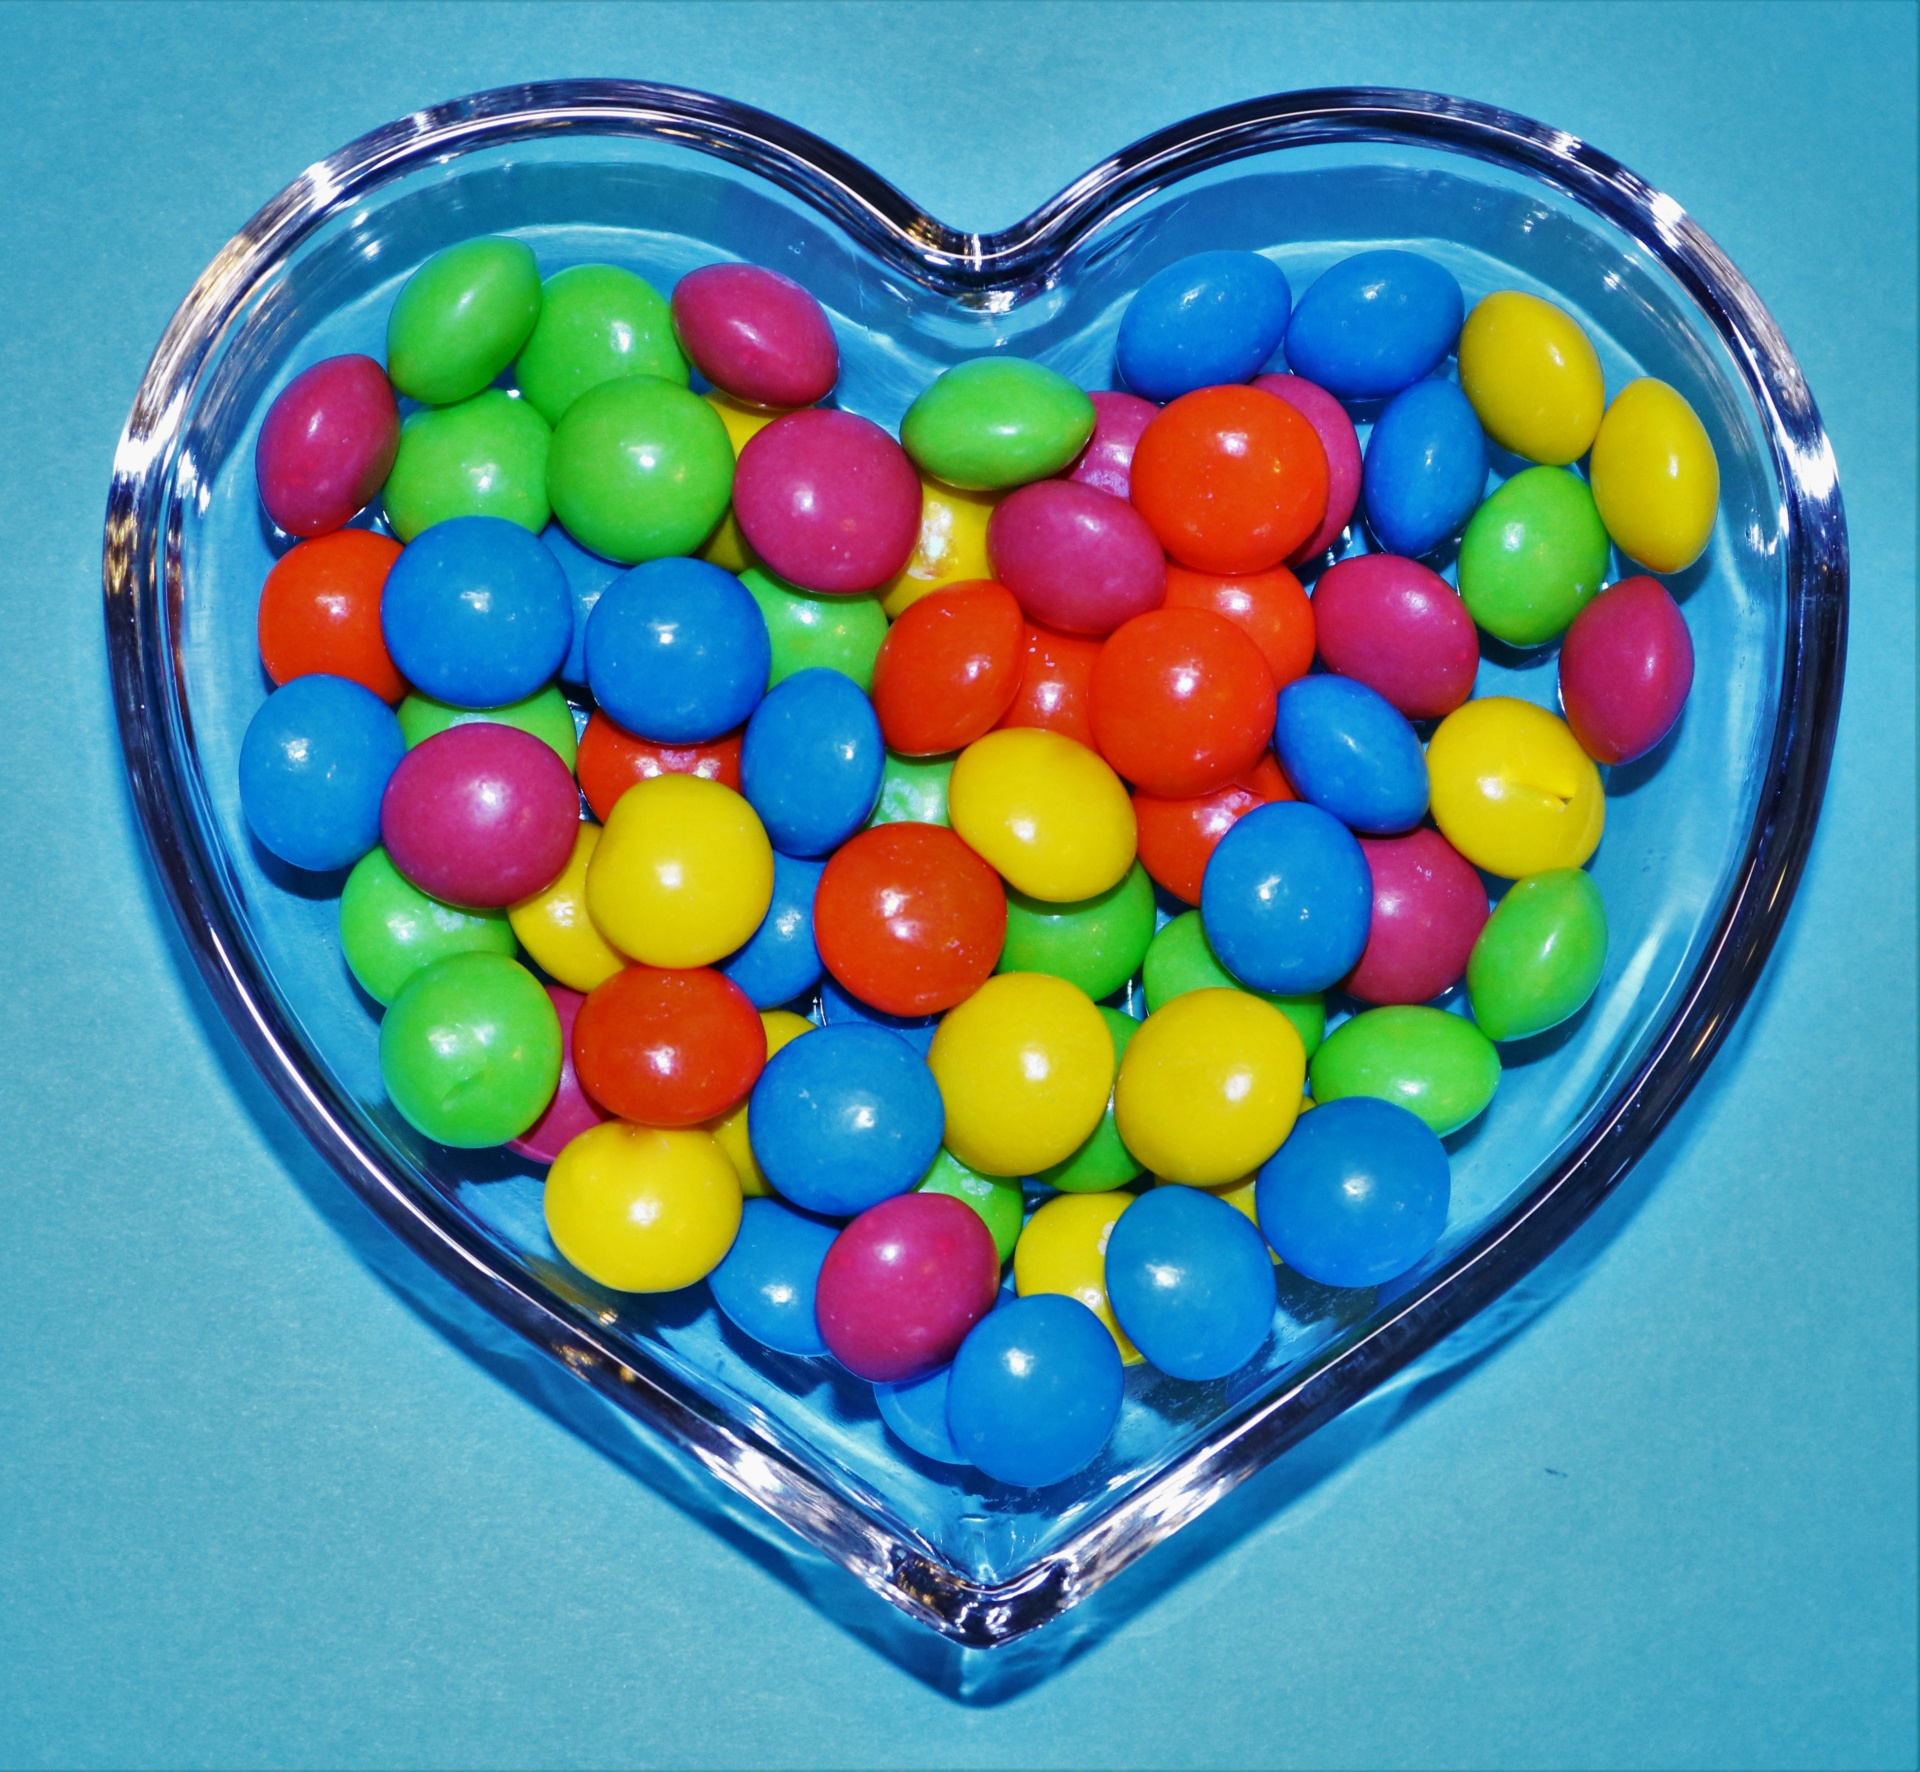 Top view close-up of colorful round candy in a heart dish, on a blue background.